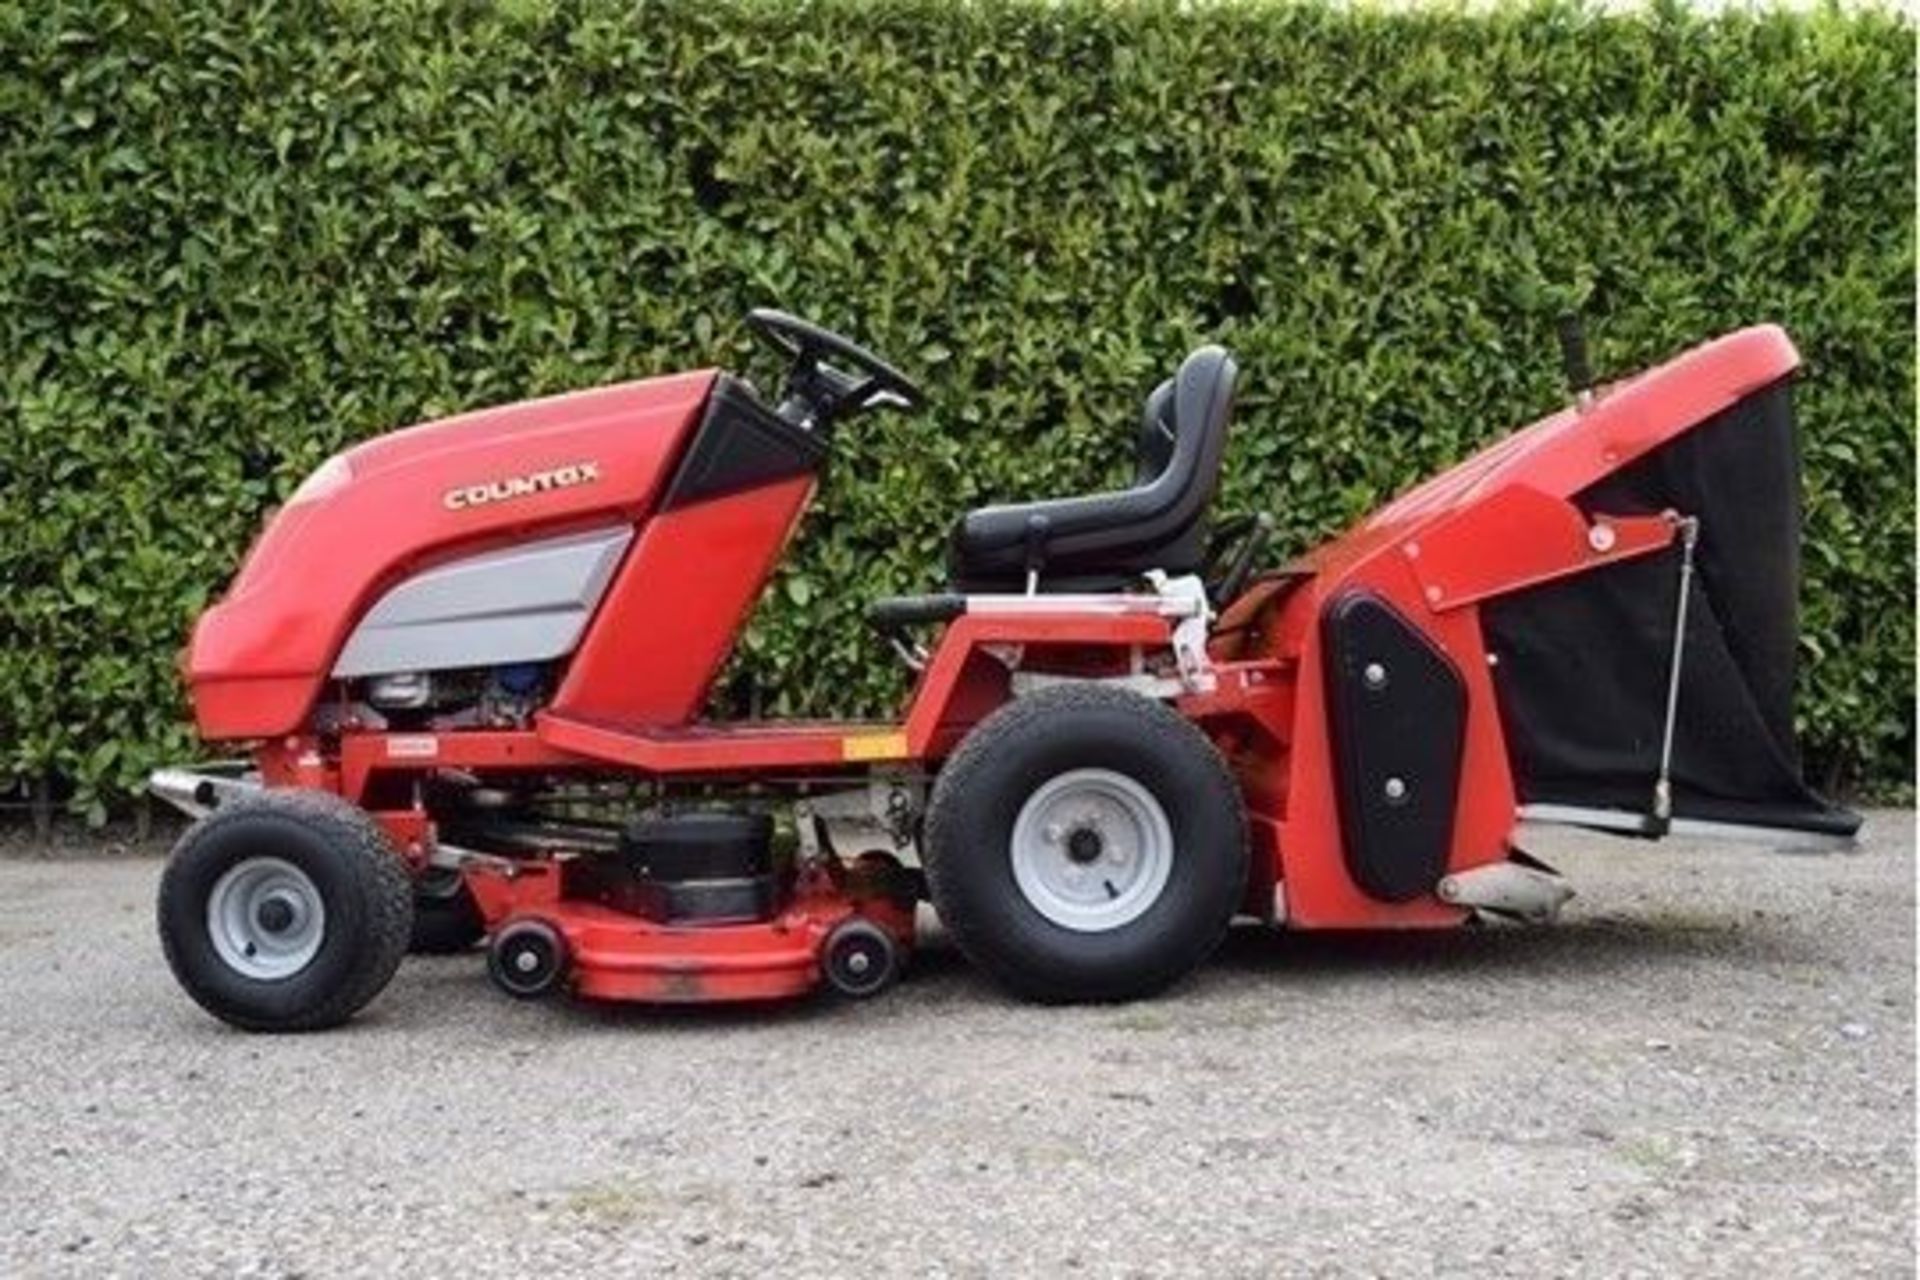 Countax C800H 44" Rear Discharge Garden Tractor With PGC. - Image 3 of 4